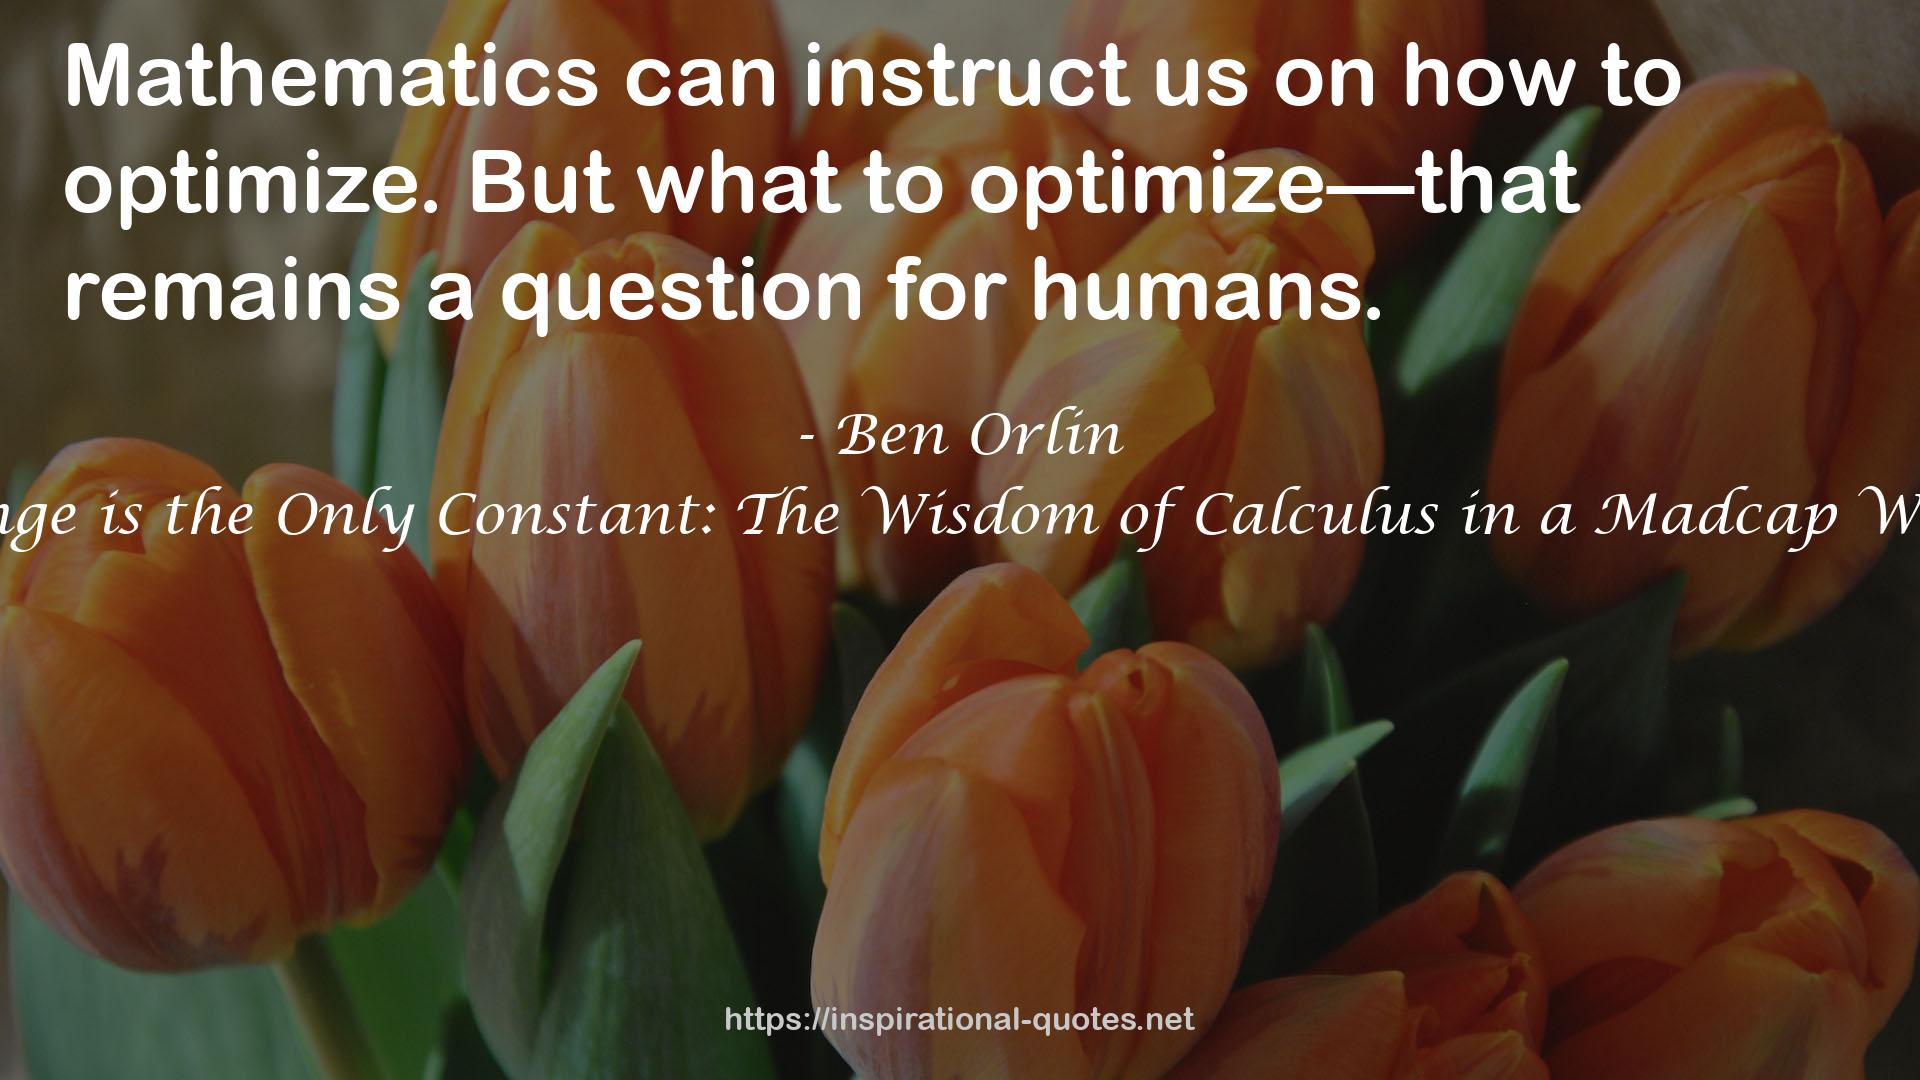 Change is the Only Constant: The Wisdom of Calculus in a Madcap World QUOTES